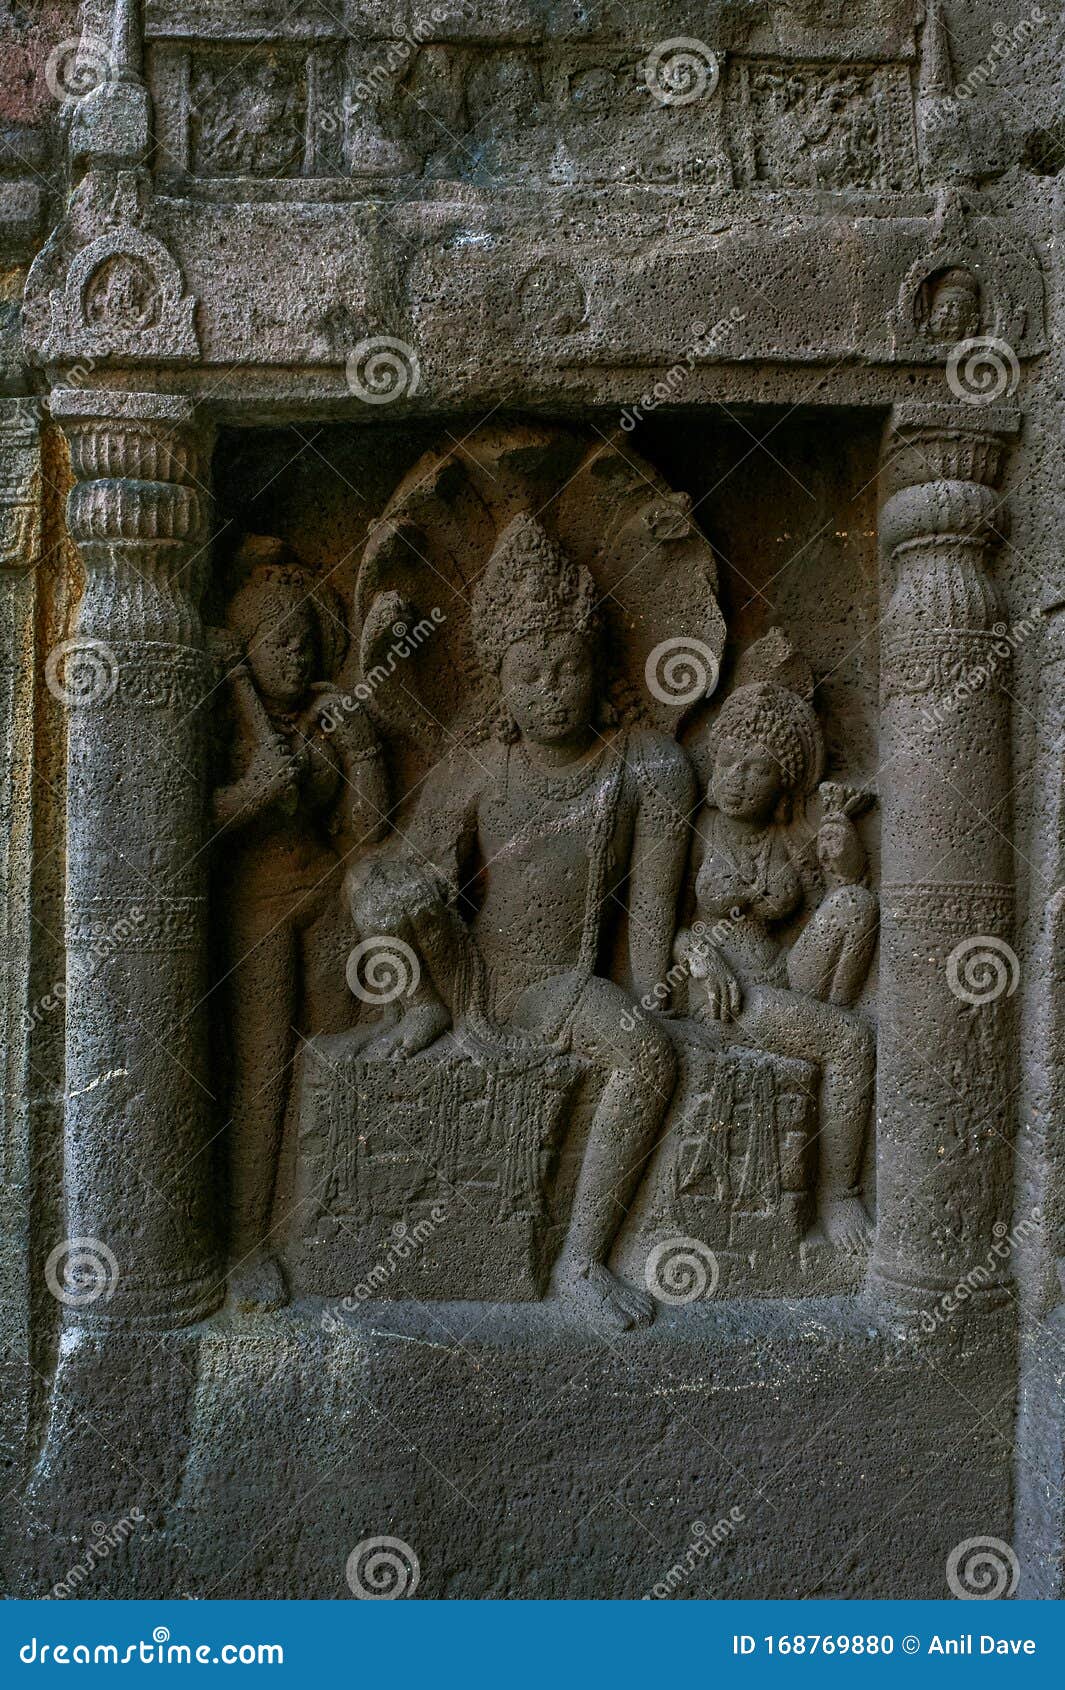 left wing of faÃÂ§ade showing nagaraja snake king and his consort nagini. ajanta caves, aurangabad, maharashtra